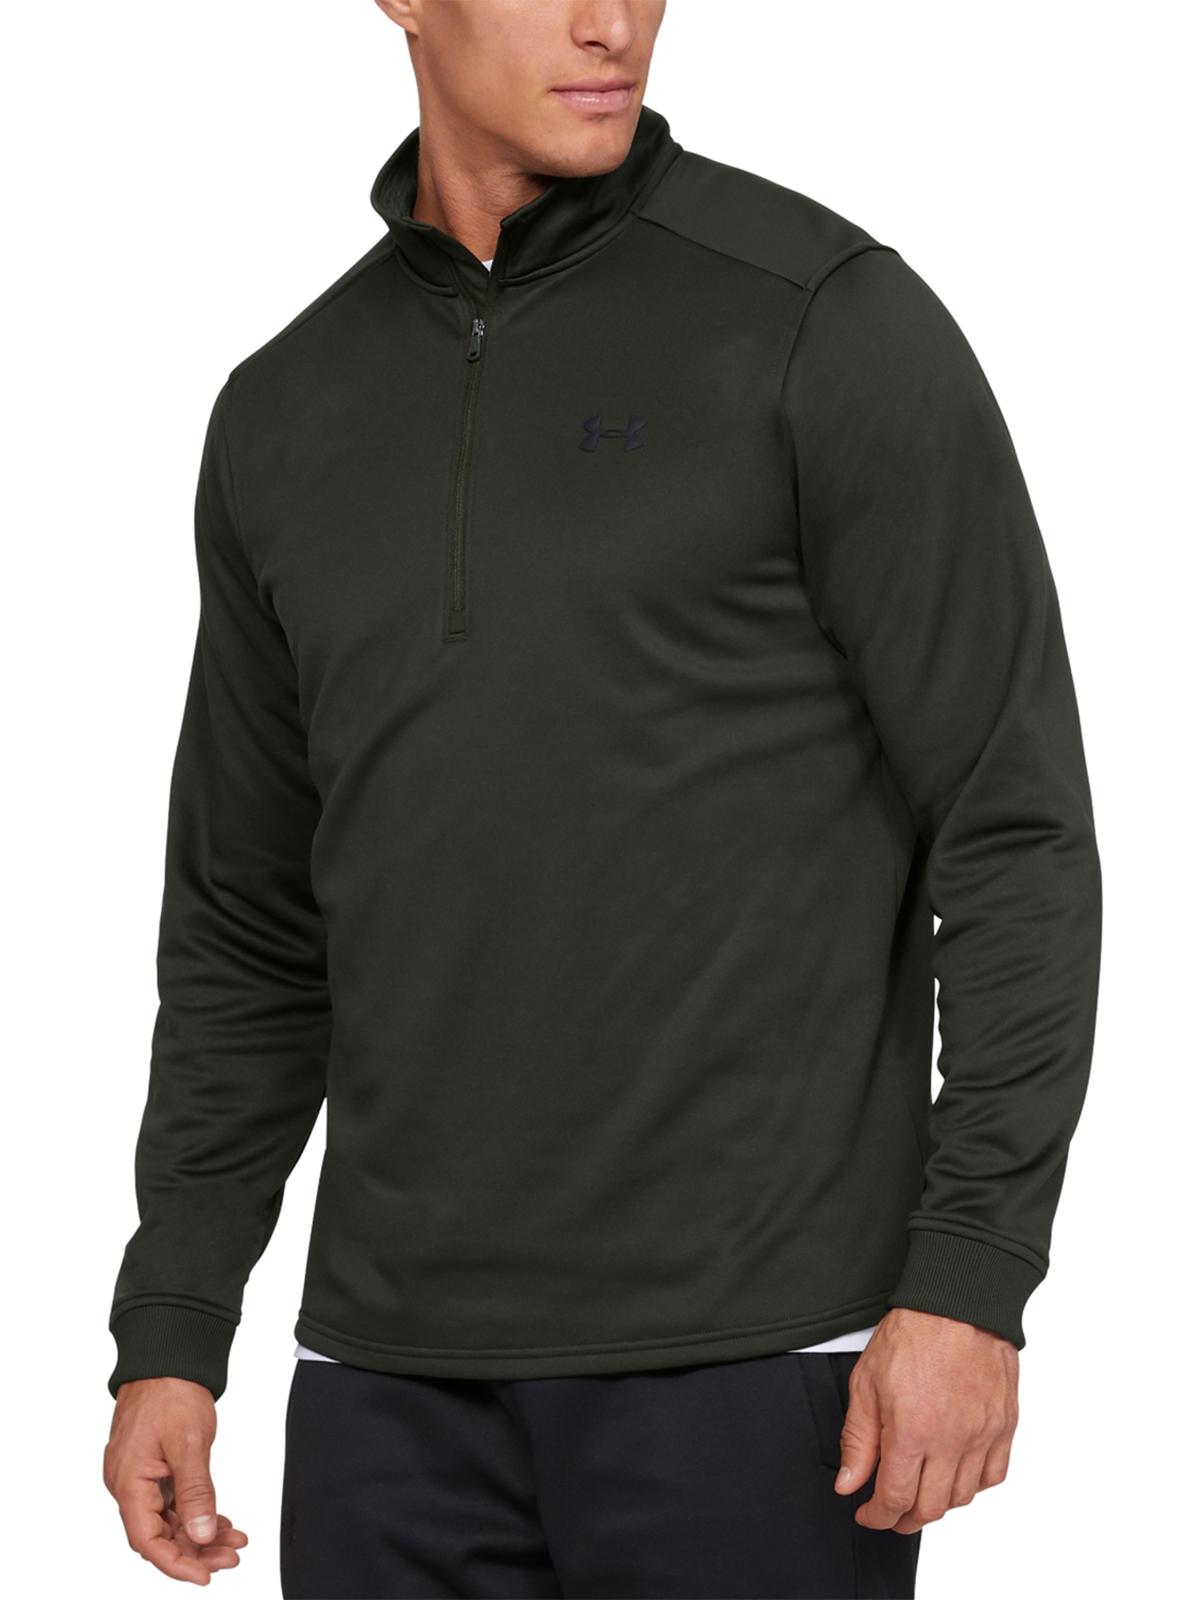 Under Armour Mens Fitness Workout 1/4 Zip Jacket - image 1 of 2